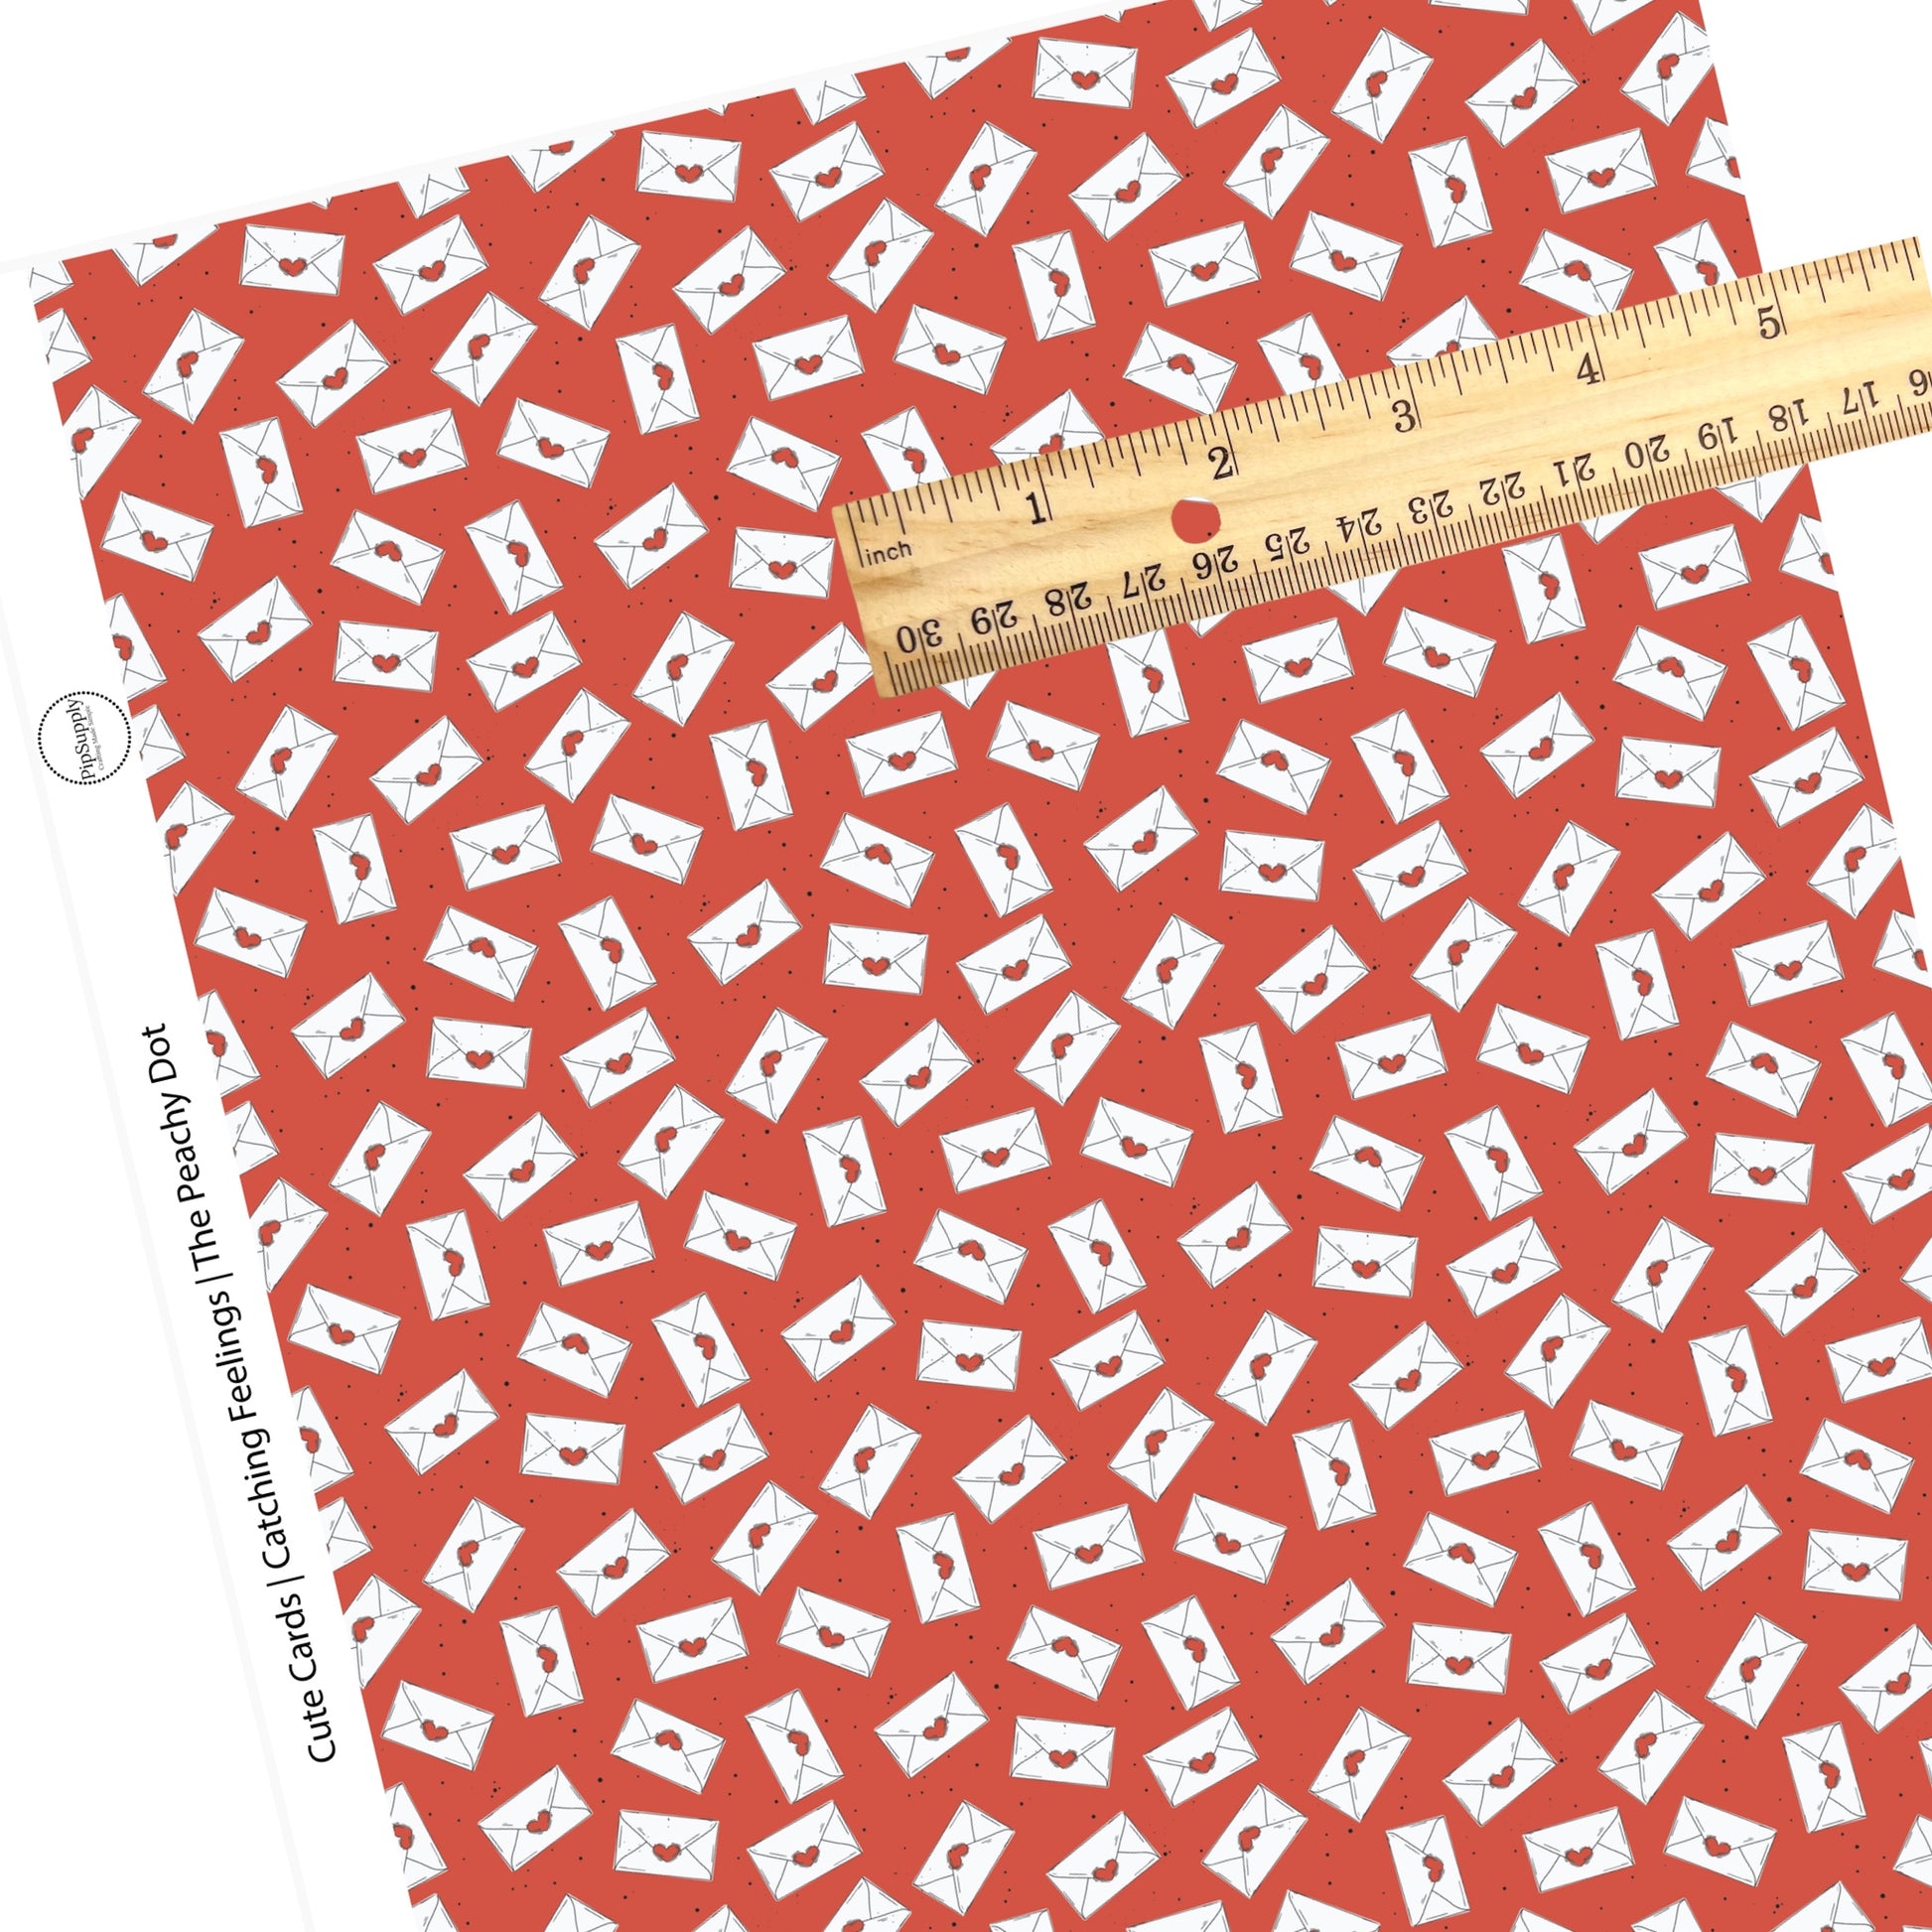 White mail with red hearts and black polka dots on red faux leather sheets